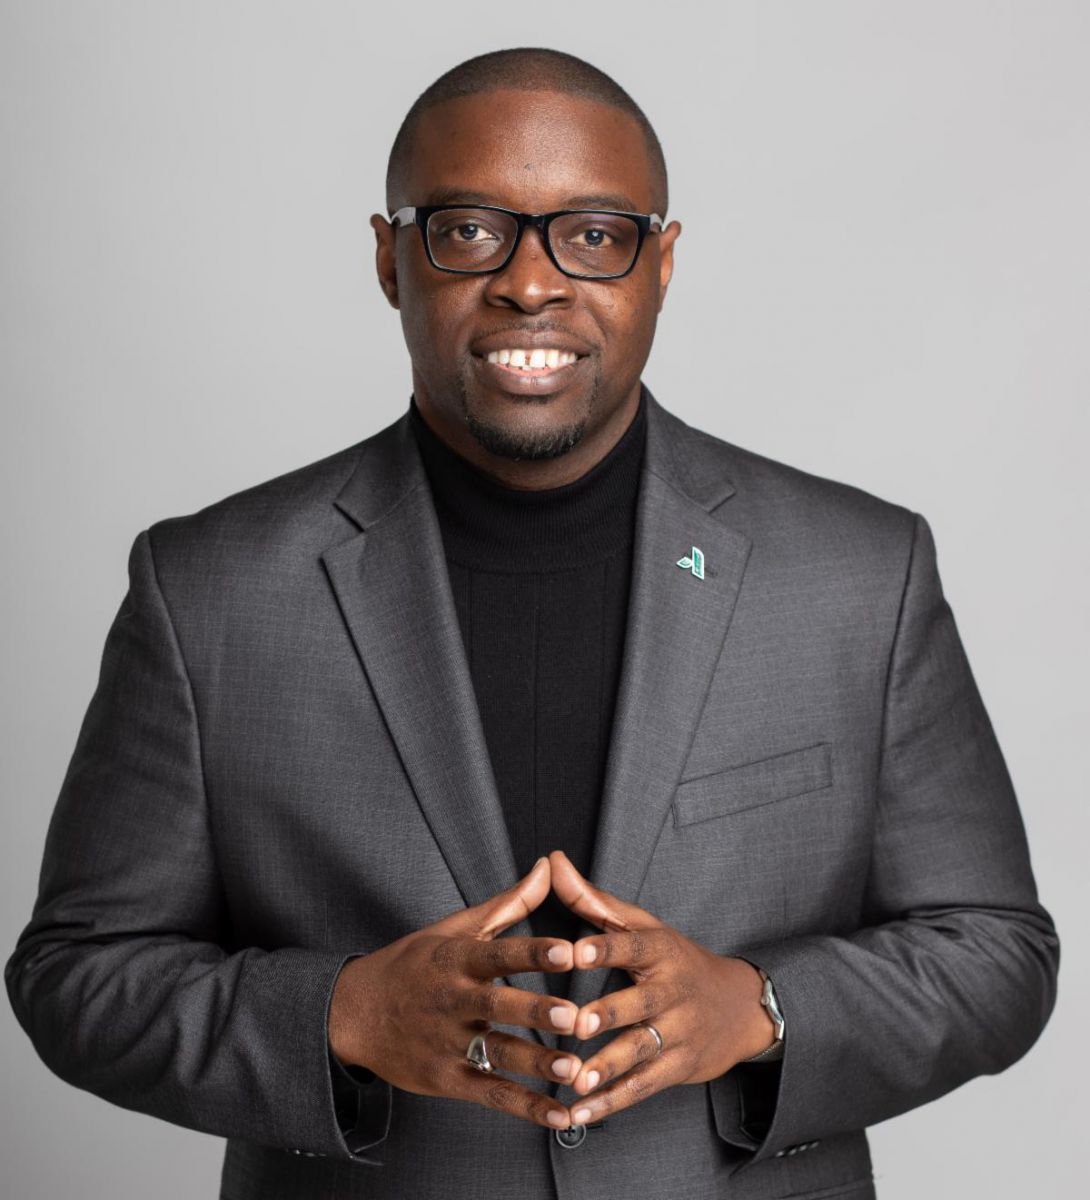 Dr. Jermaine Whirl, an African American male, smiles wearing a grey suit jacket over a black shirt with his hands steepled towards the camera in front of his abdomen.